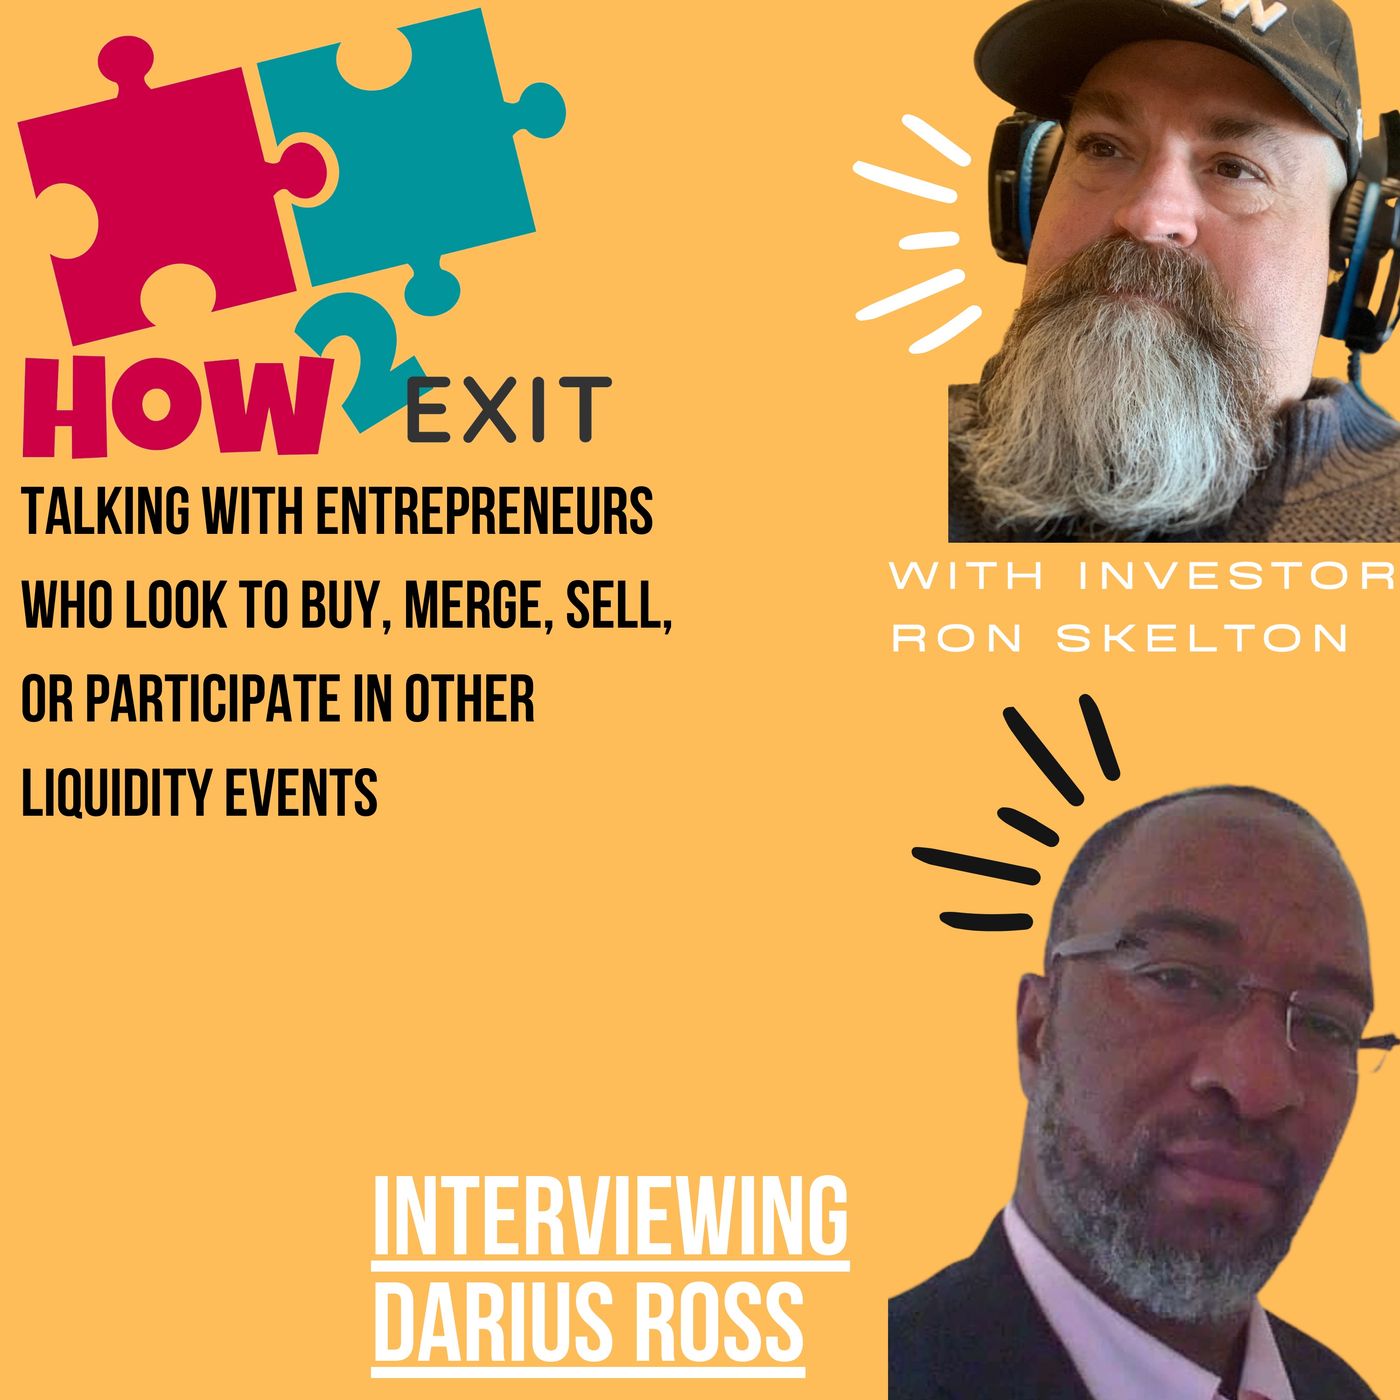 How2Exit Episode 68: Darius Ross - The "Wyatt Earp" of Small Business Investments. Image